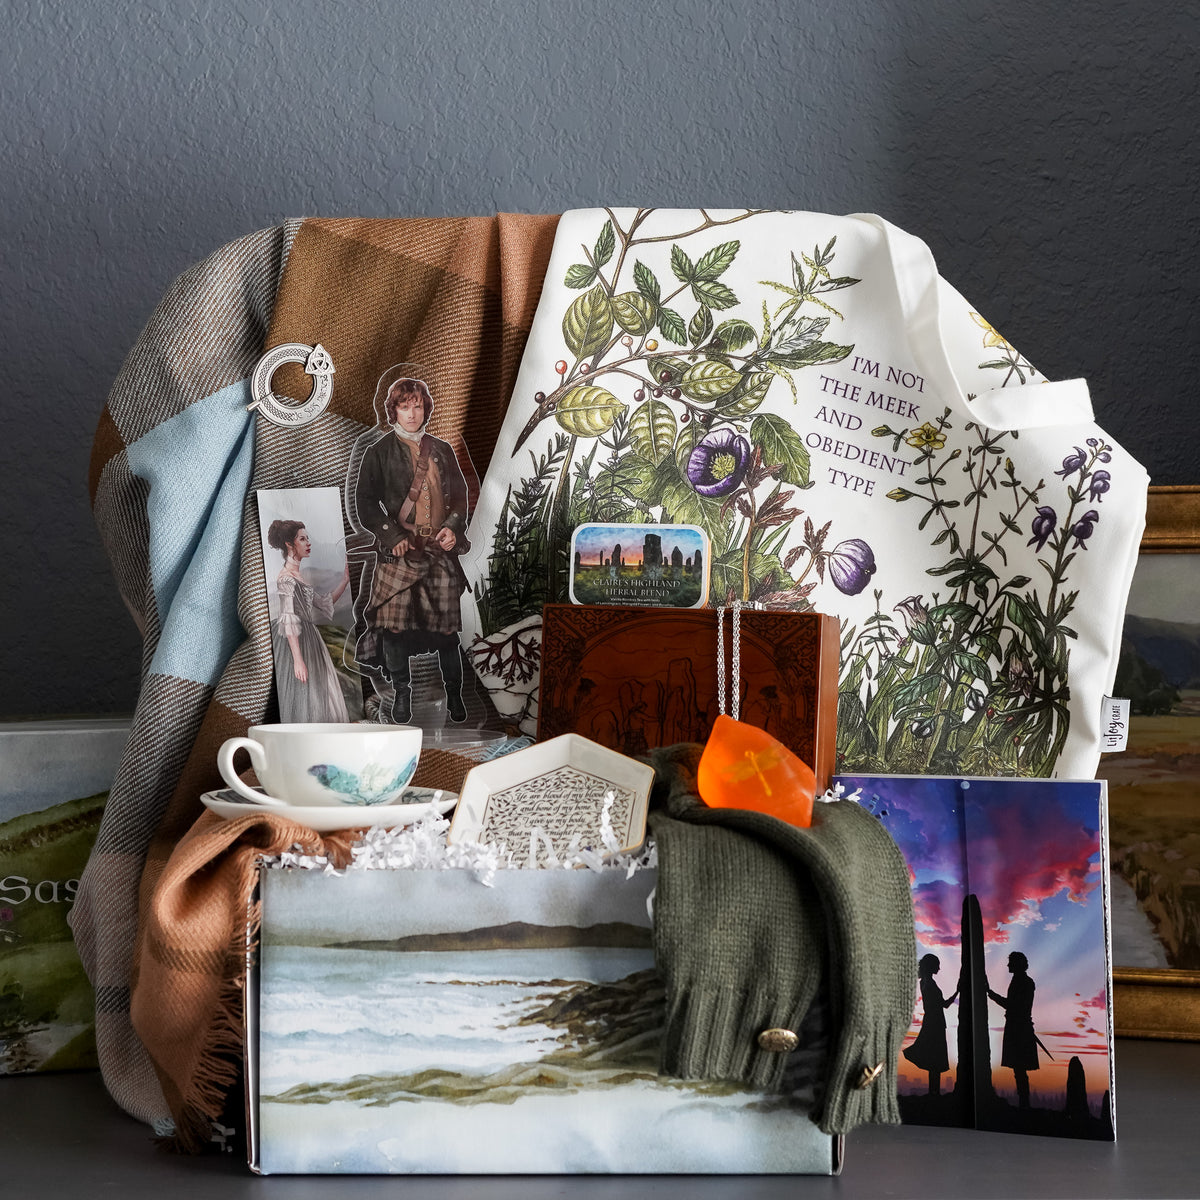 Sassenach Crate comes with a teacup, bookmark, trinket dish, loose leaf tea, music box, wedding ring, dragonfly soap, and more